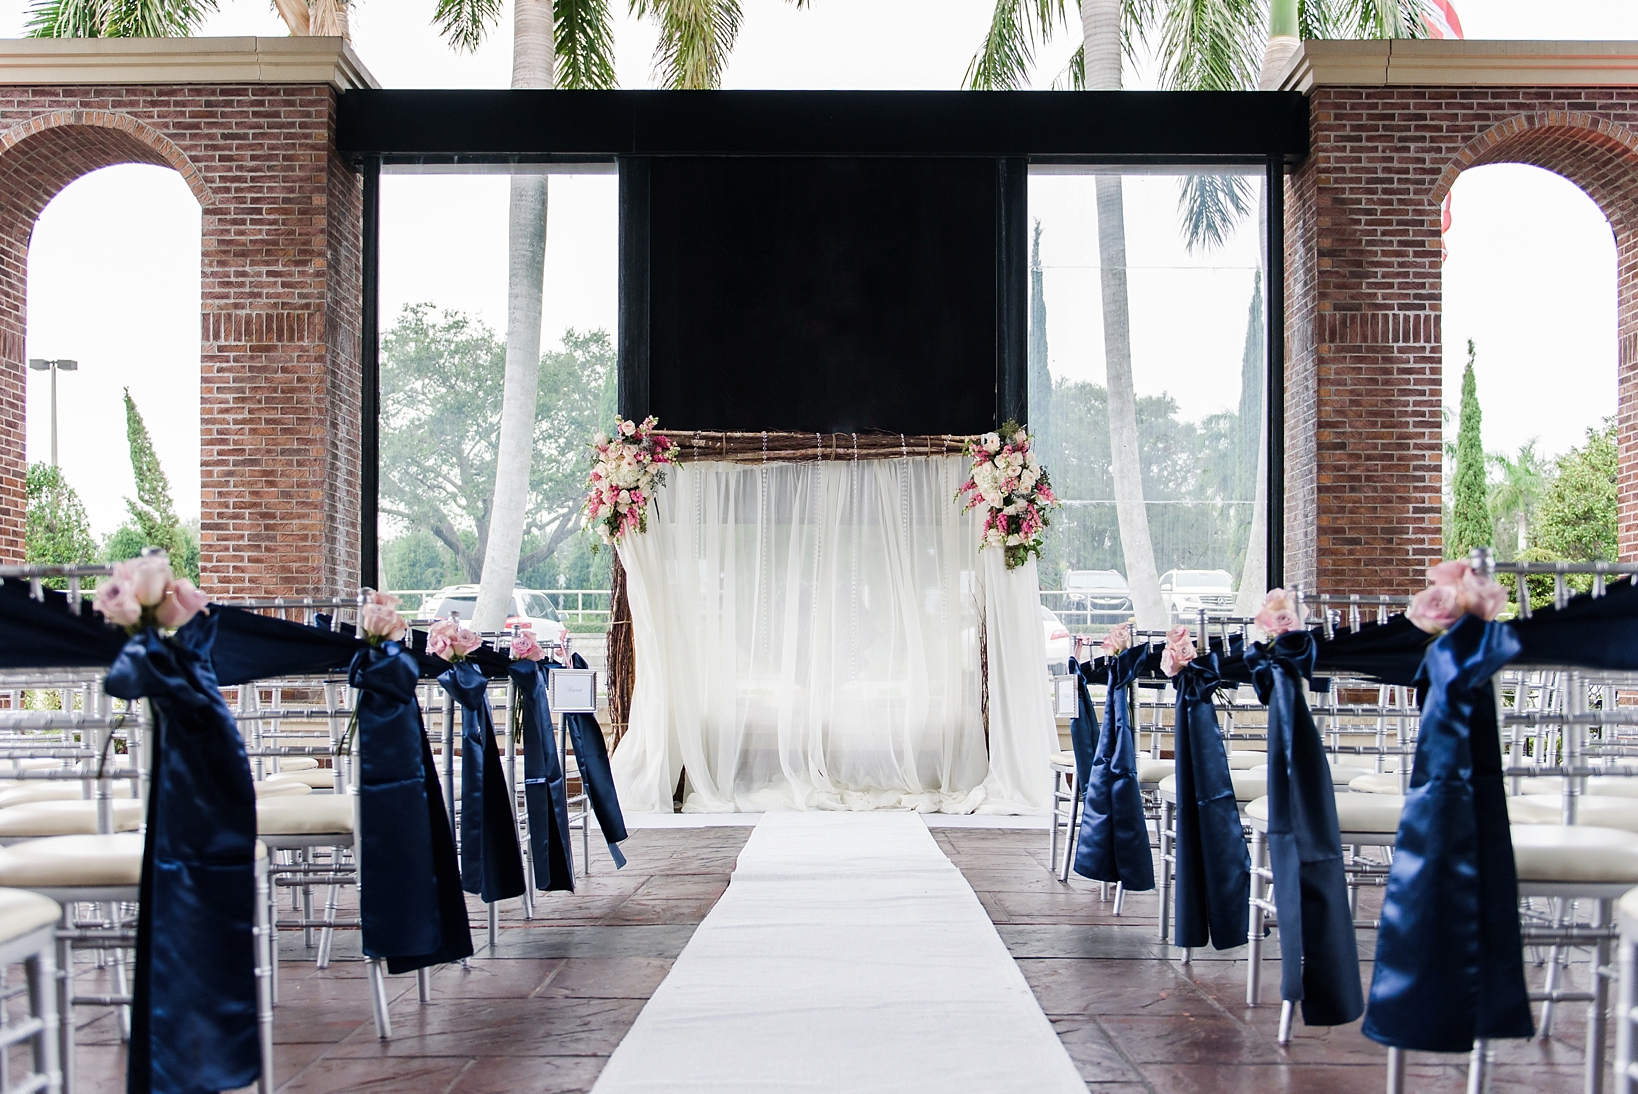 Ceremony space at the T. Pepin Hospitality Centre in Tampa, FL